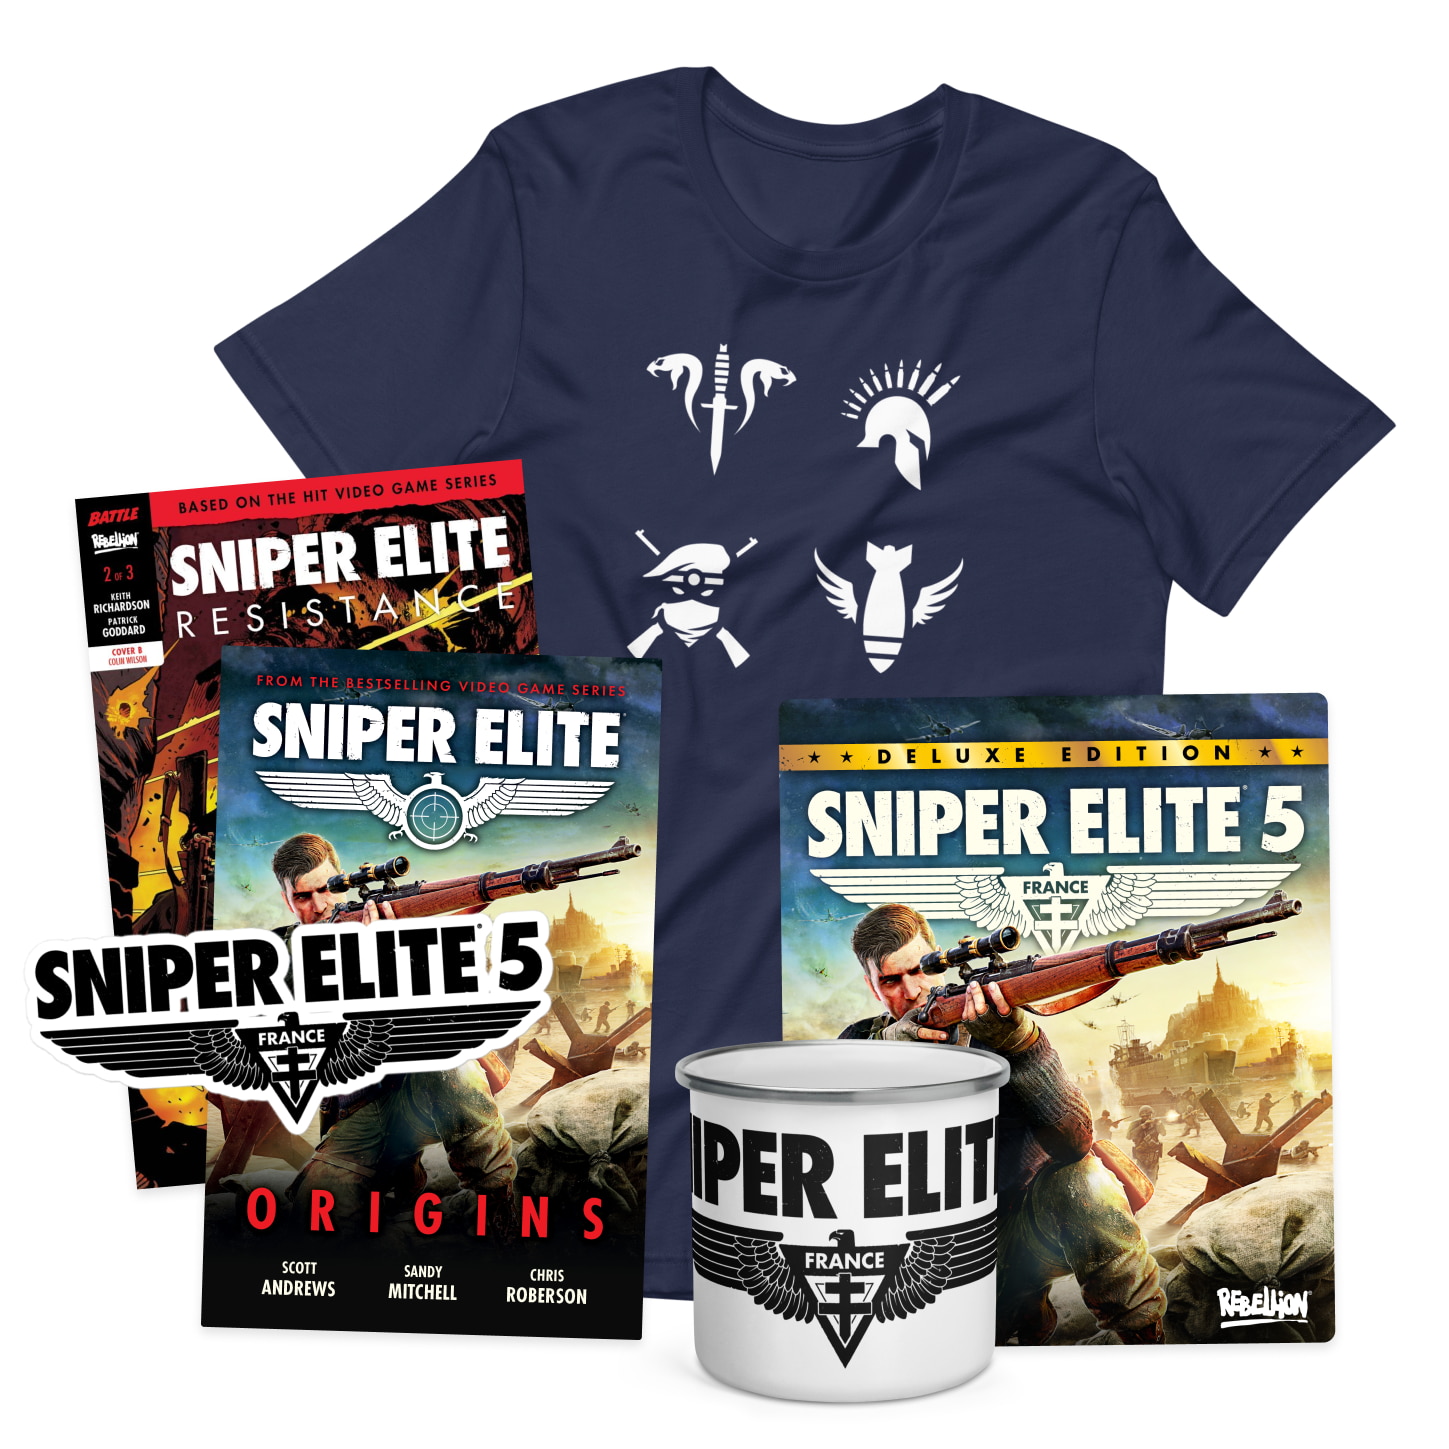 Image of the Sniper elite Overlord bundle contains the Deluxe edition, Sniper Elite Mug, Sniper Elite origins, Sniper Elite resistance and a Sniper Elite 4 factions T-shirt